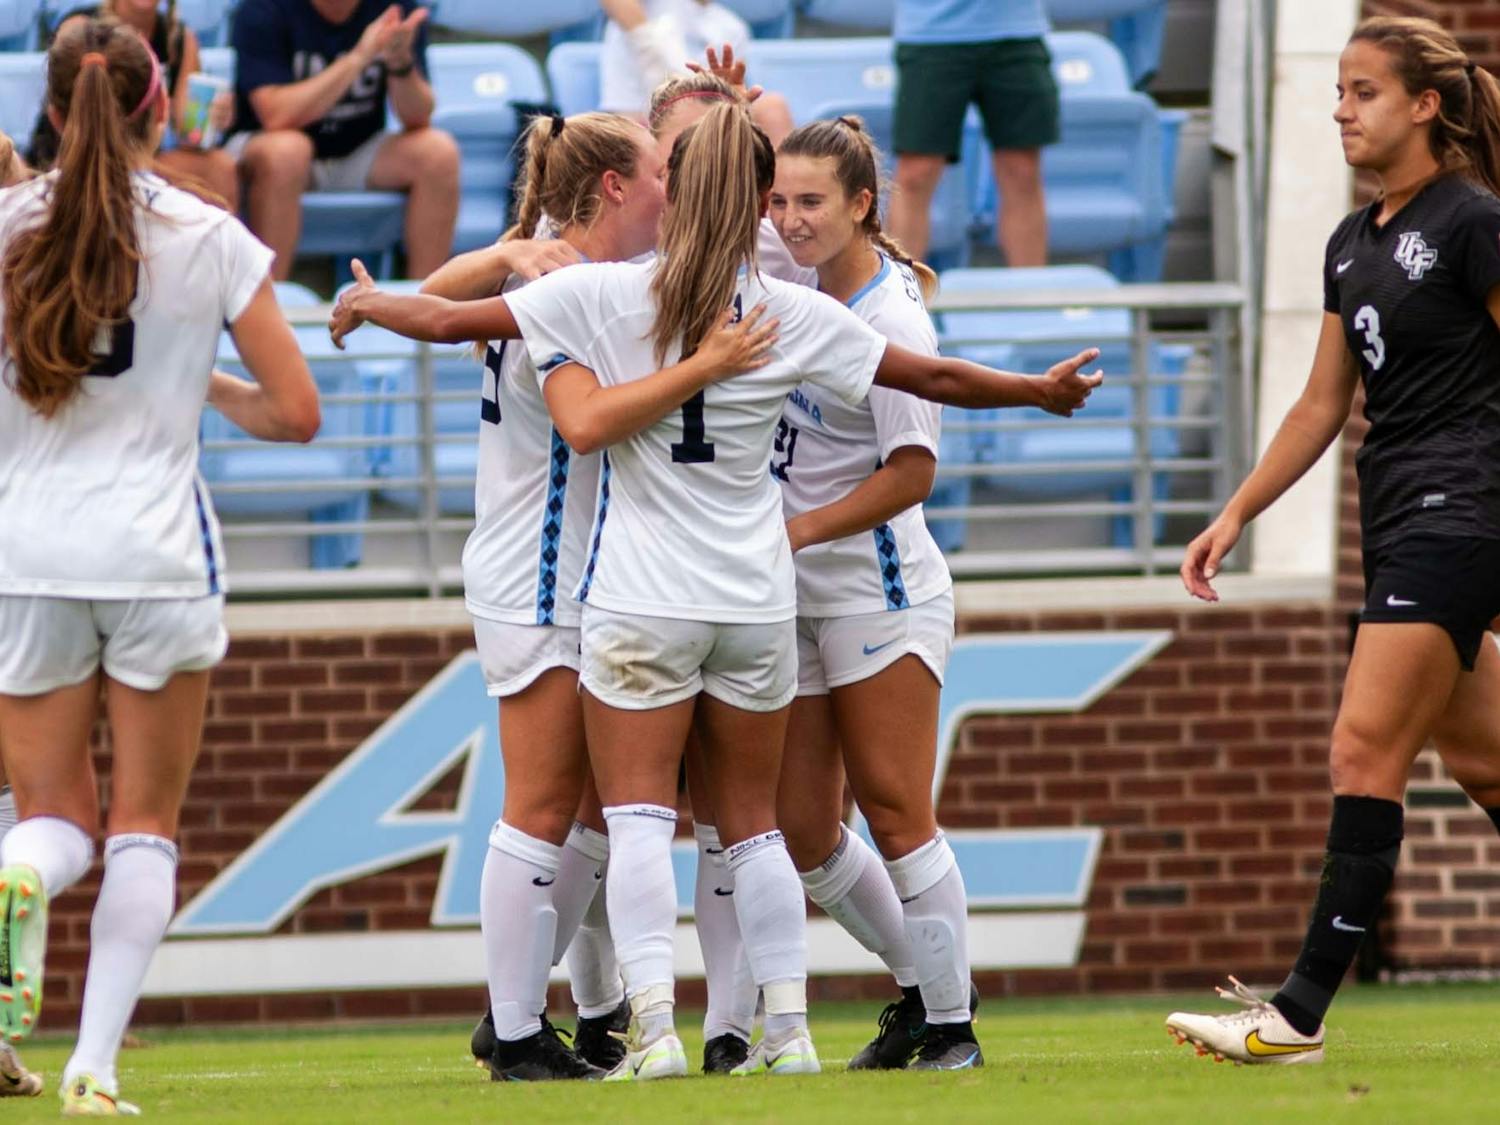 The UNC Women’s soccer team celebrates after a goal against the University of Central Florida on Sunday, Sept. 11, 2022, at Dorrance Field. UNC won 2-1.